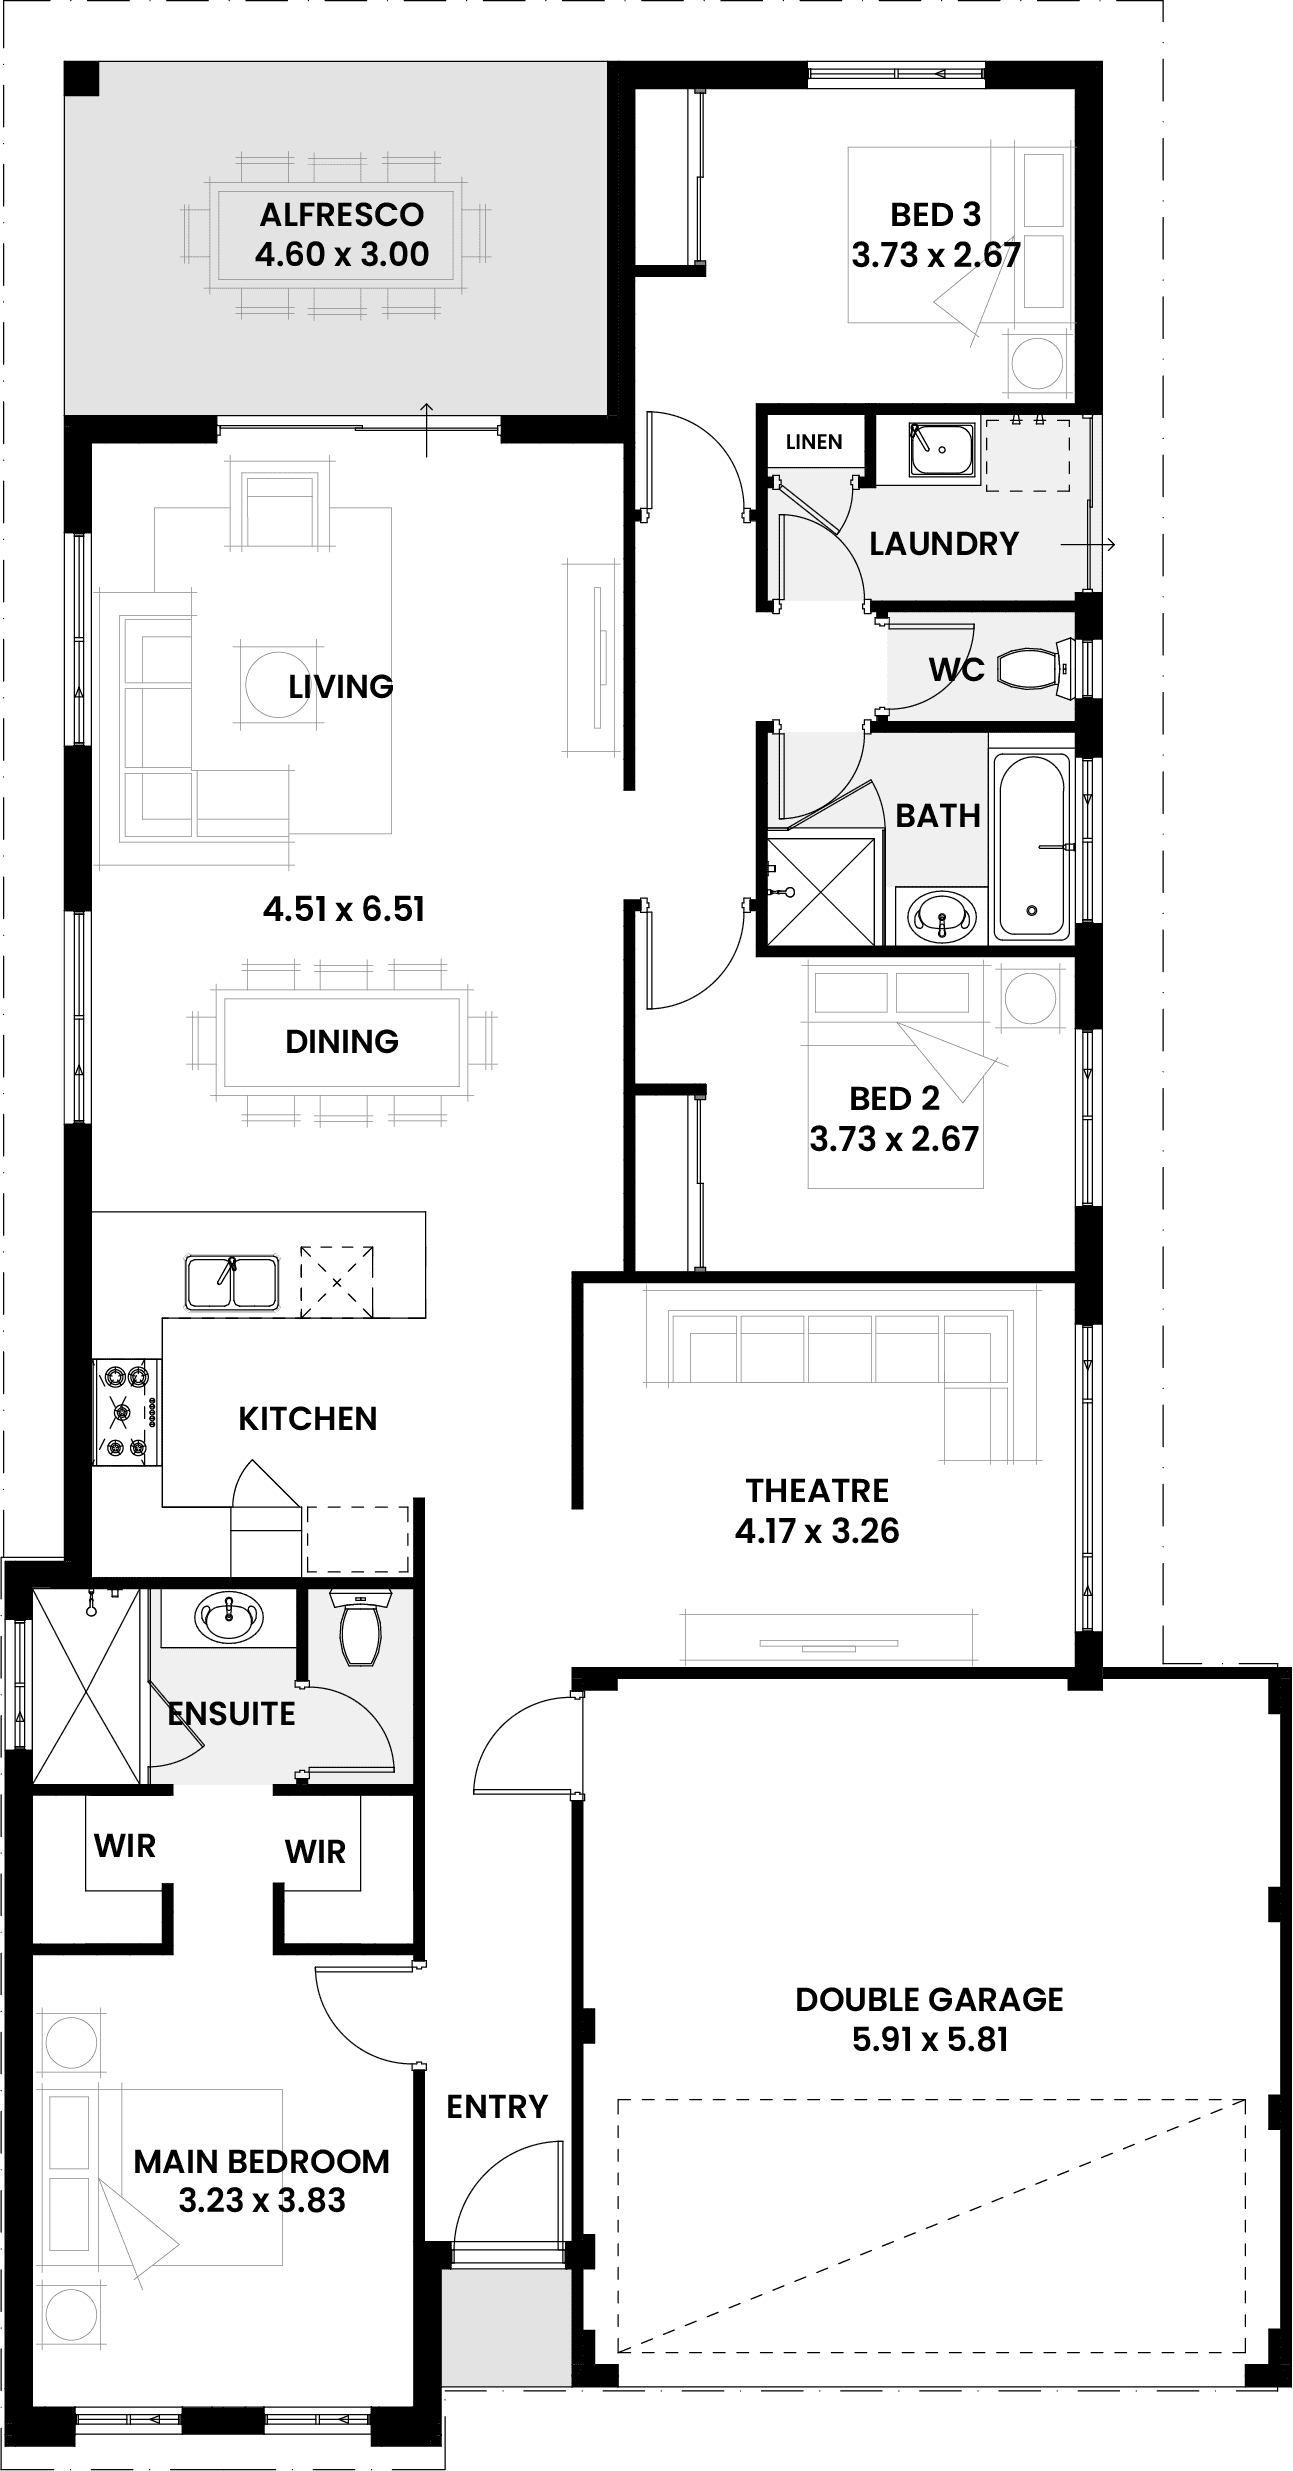 Floorplan for The Basswood, a Move Homes new home design perfect for first time buyers and new builders in Perth